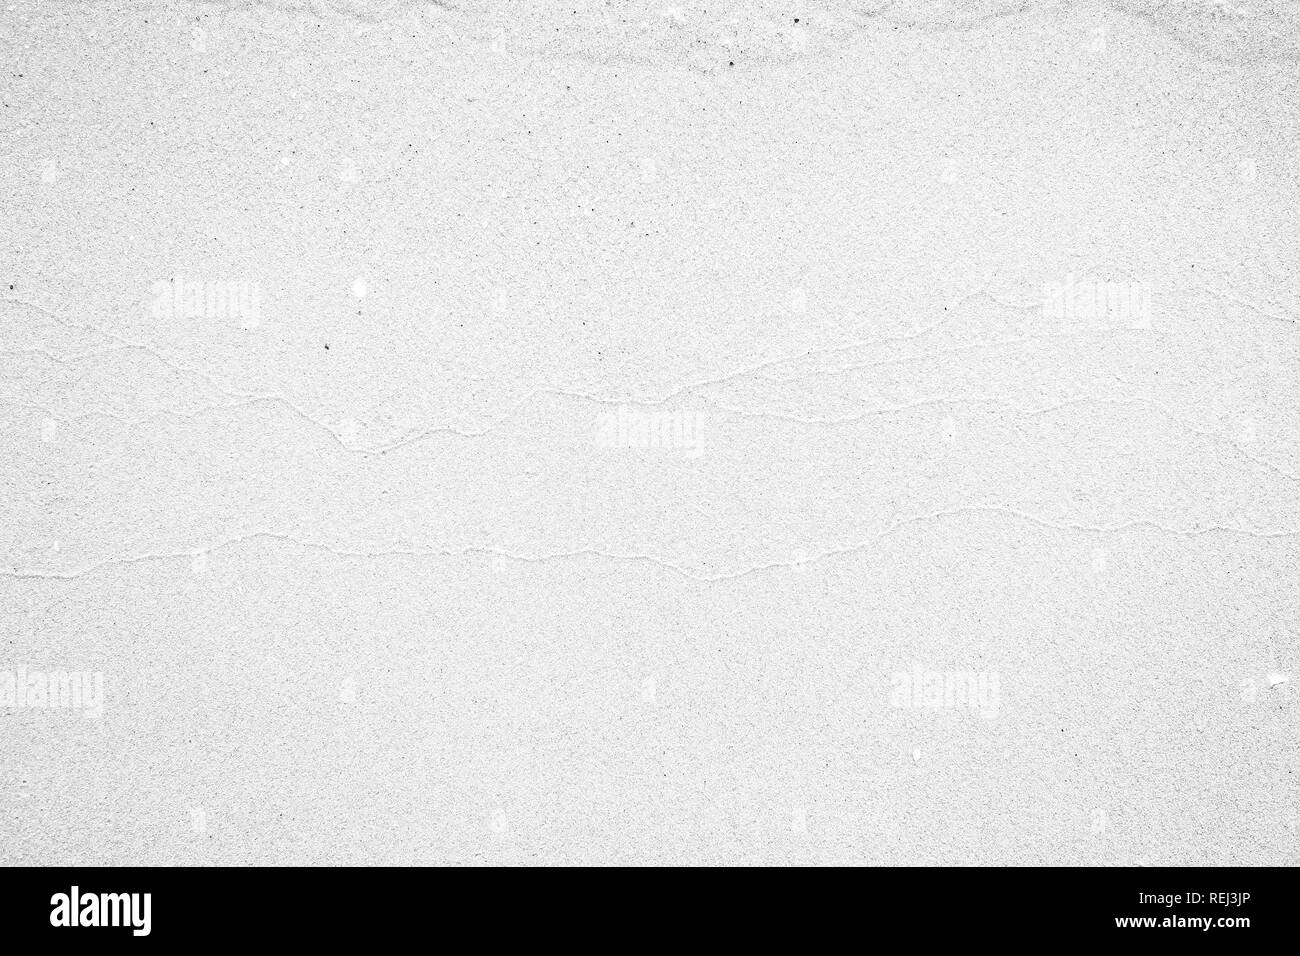 White sea sand pattern texture background for design decoration. Stock Photo